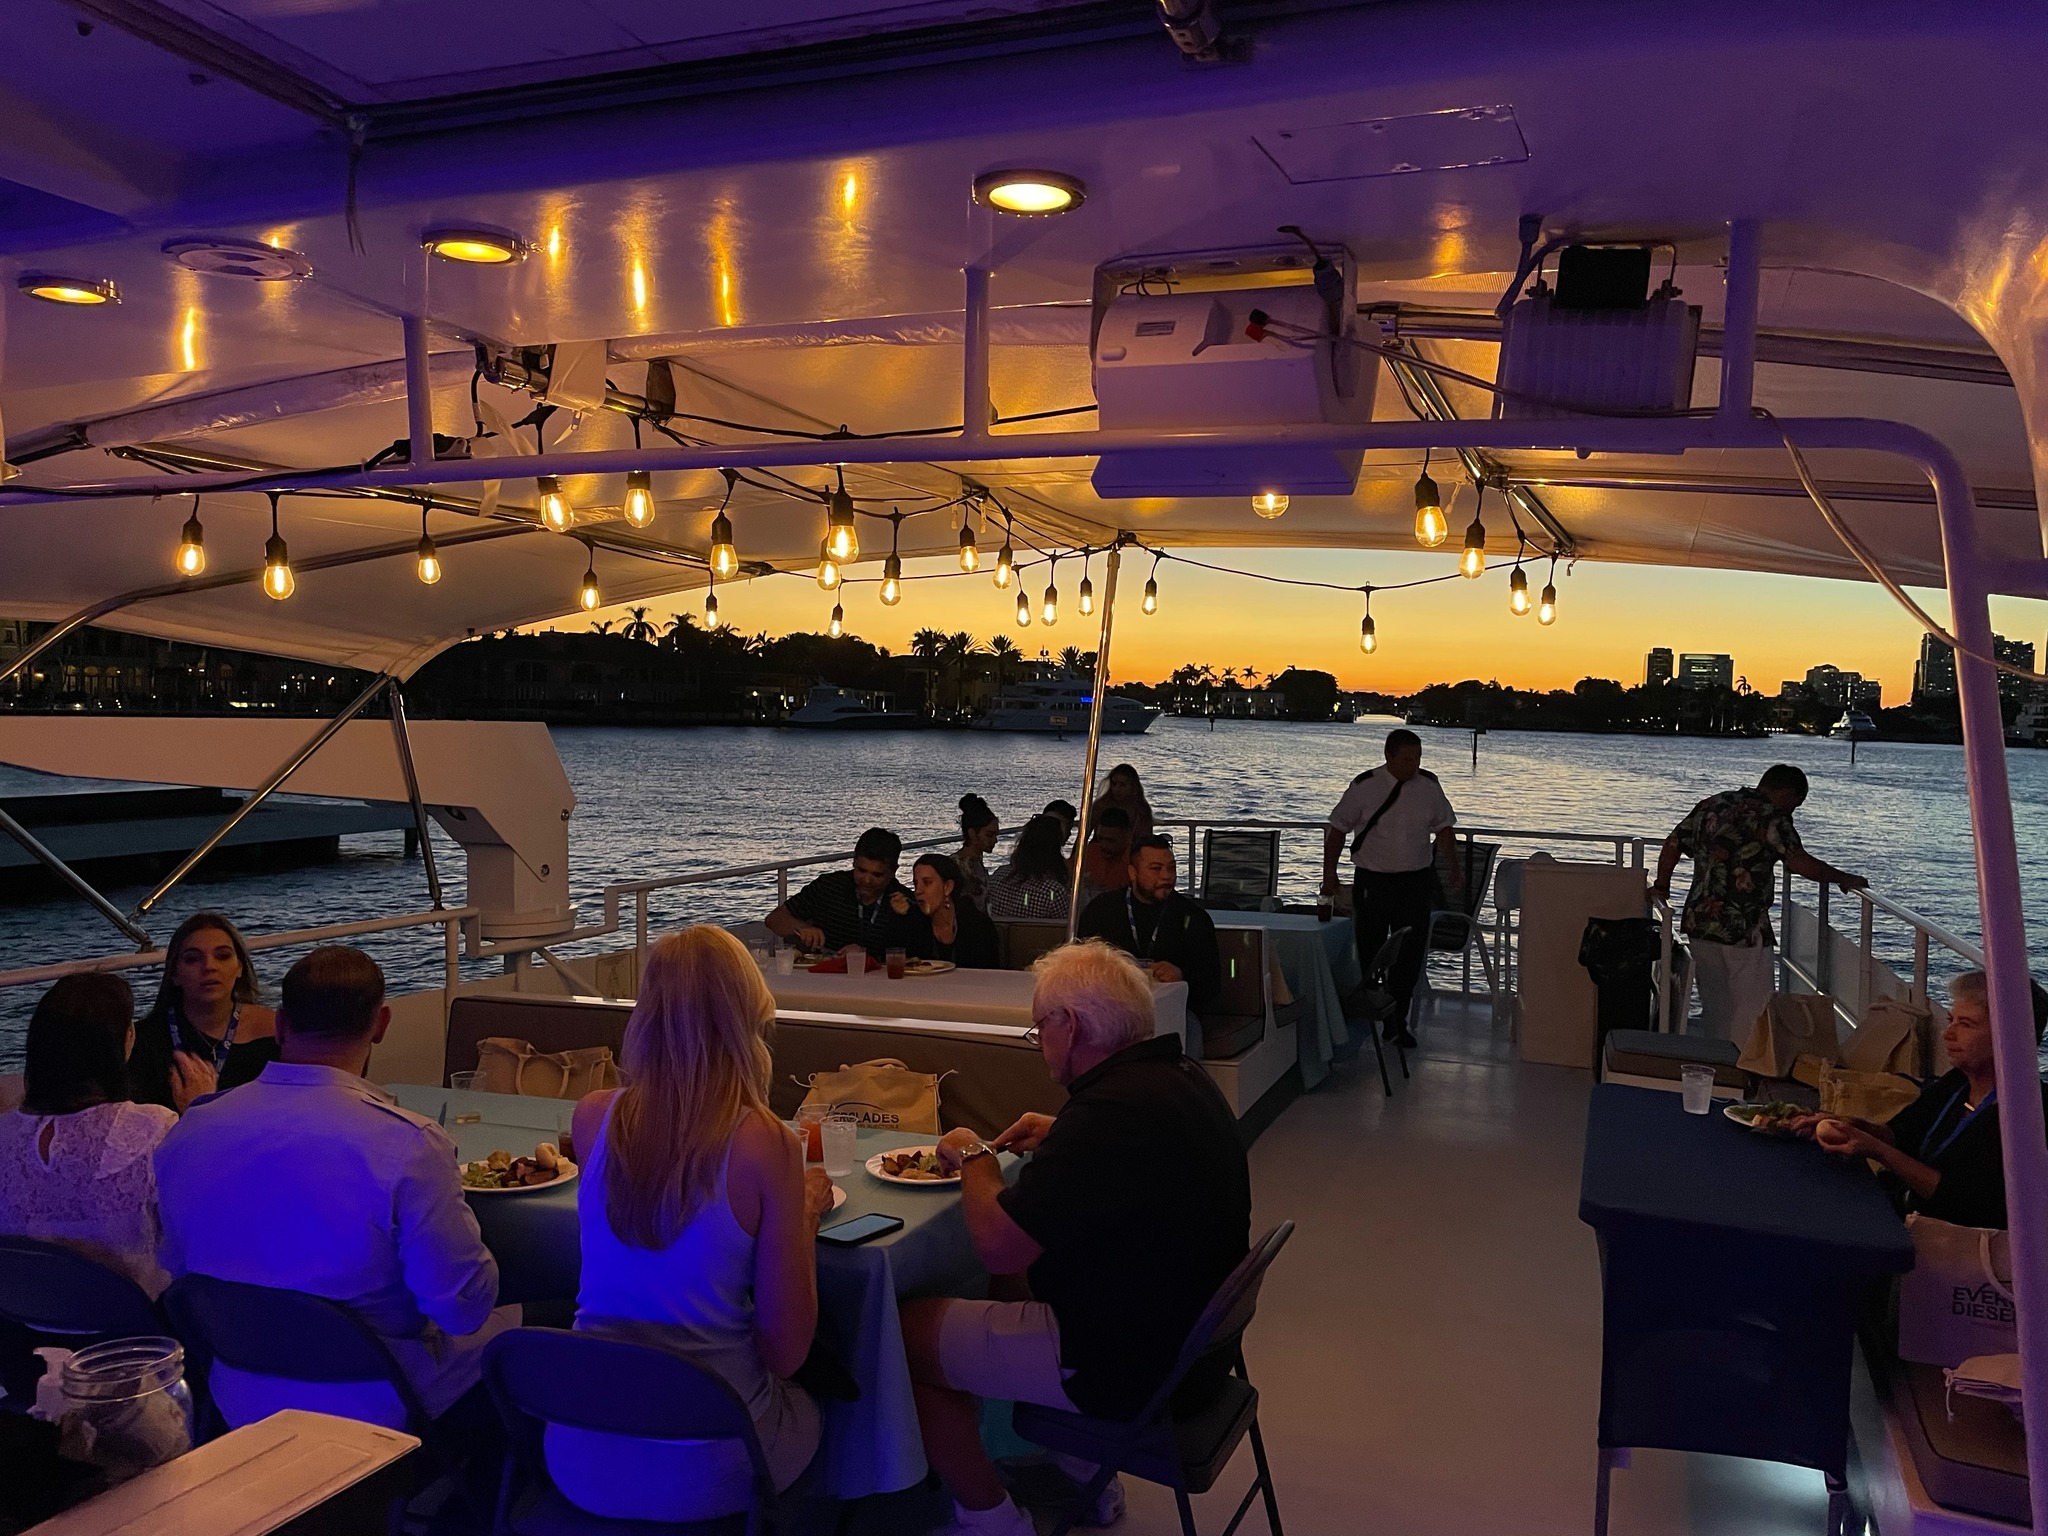 yacht charter event dinner cruise party at the sea fort lauderdale